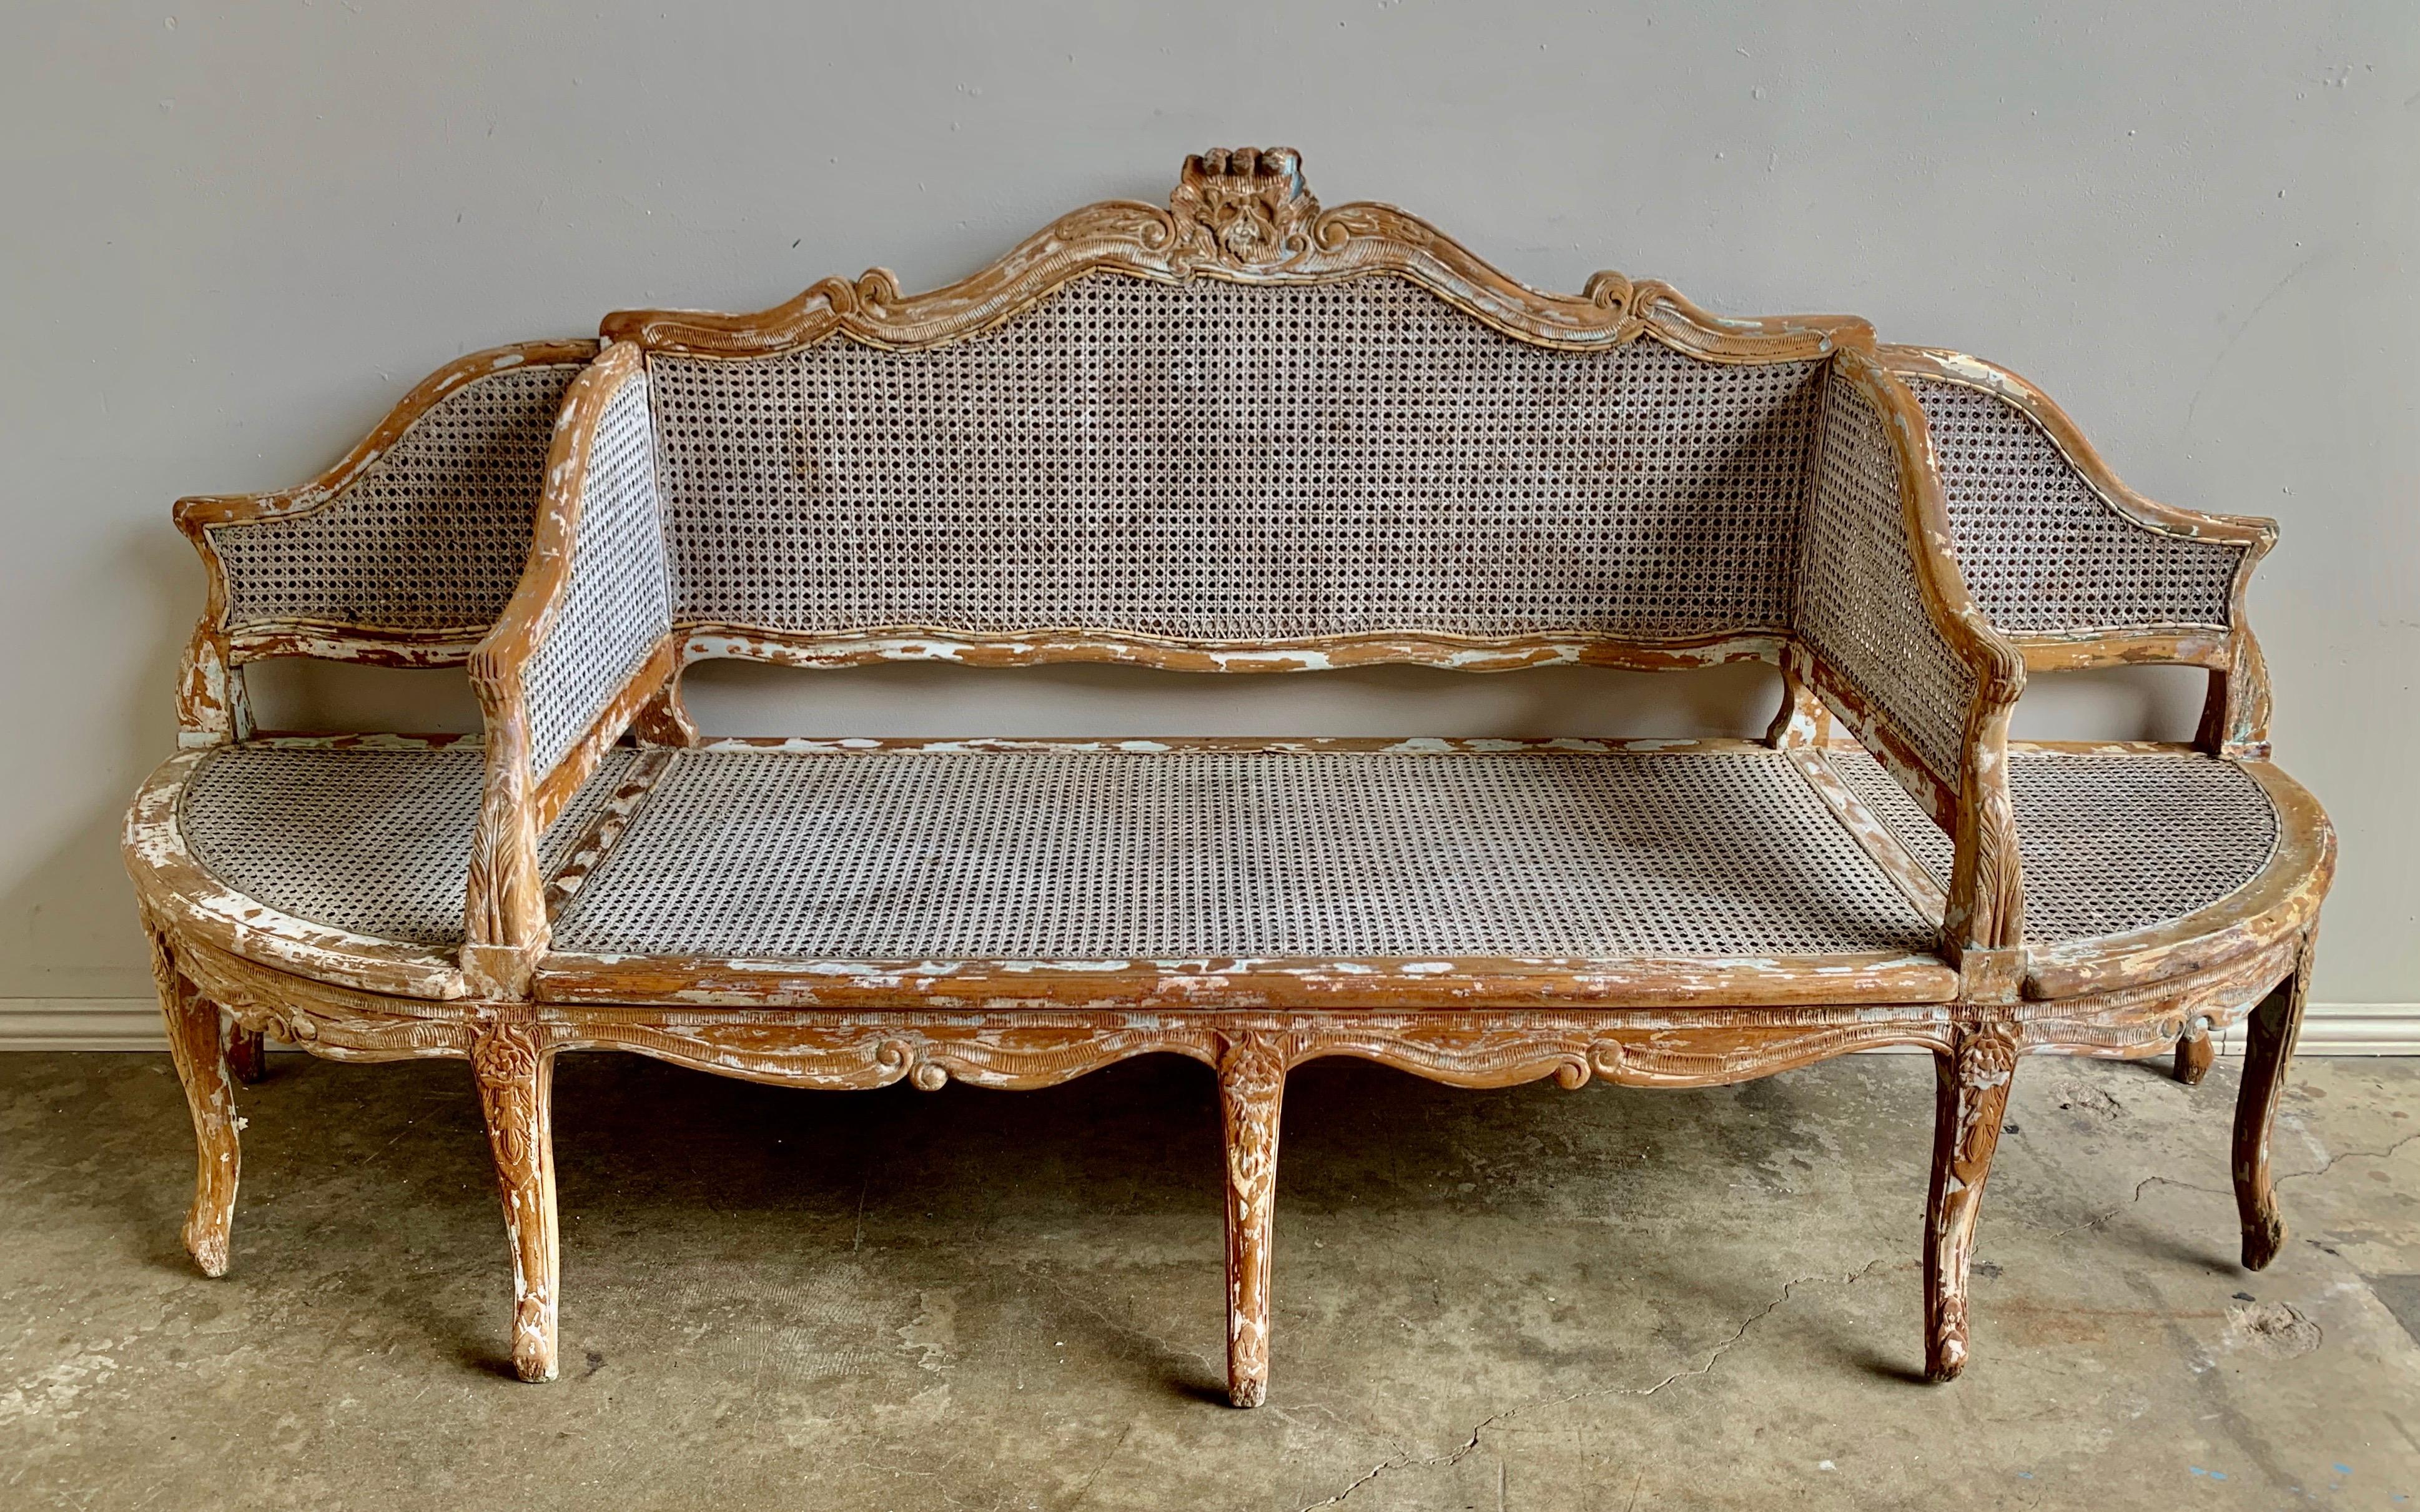 19th century part French carved cane settee. The settee stands on nine-cabriole legs with ram's head feet. There are remnants of paint that can be seen throughout the piece. Cushions can be made but it looks beautiful as it is.